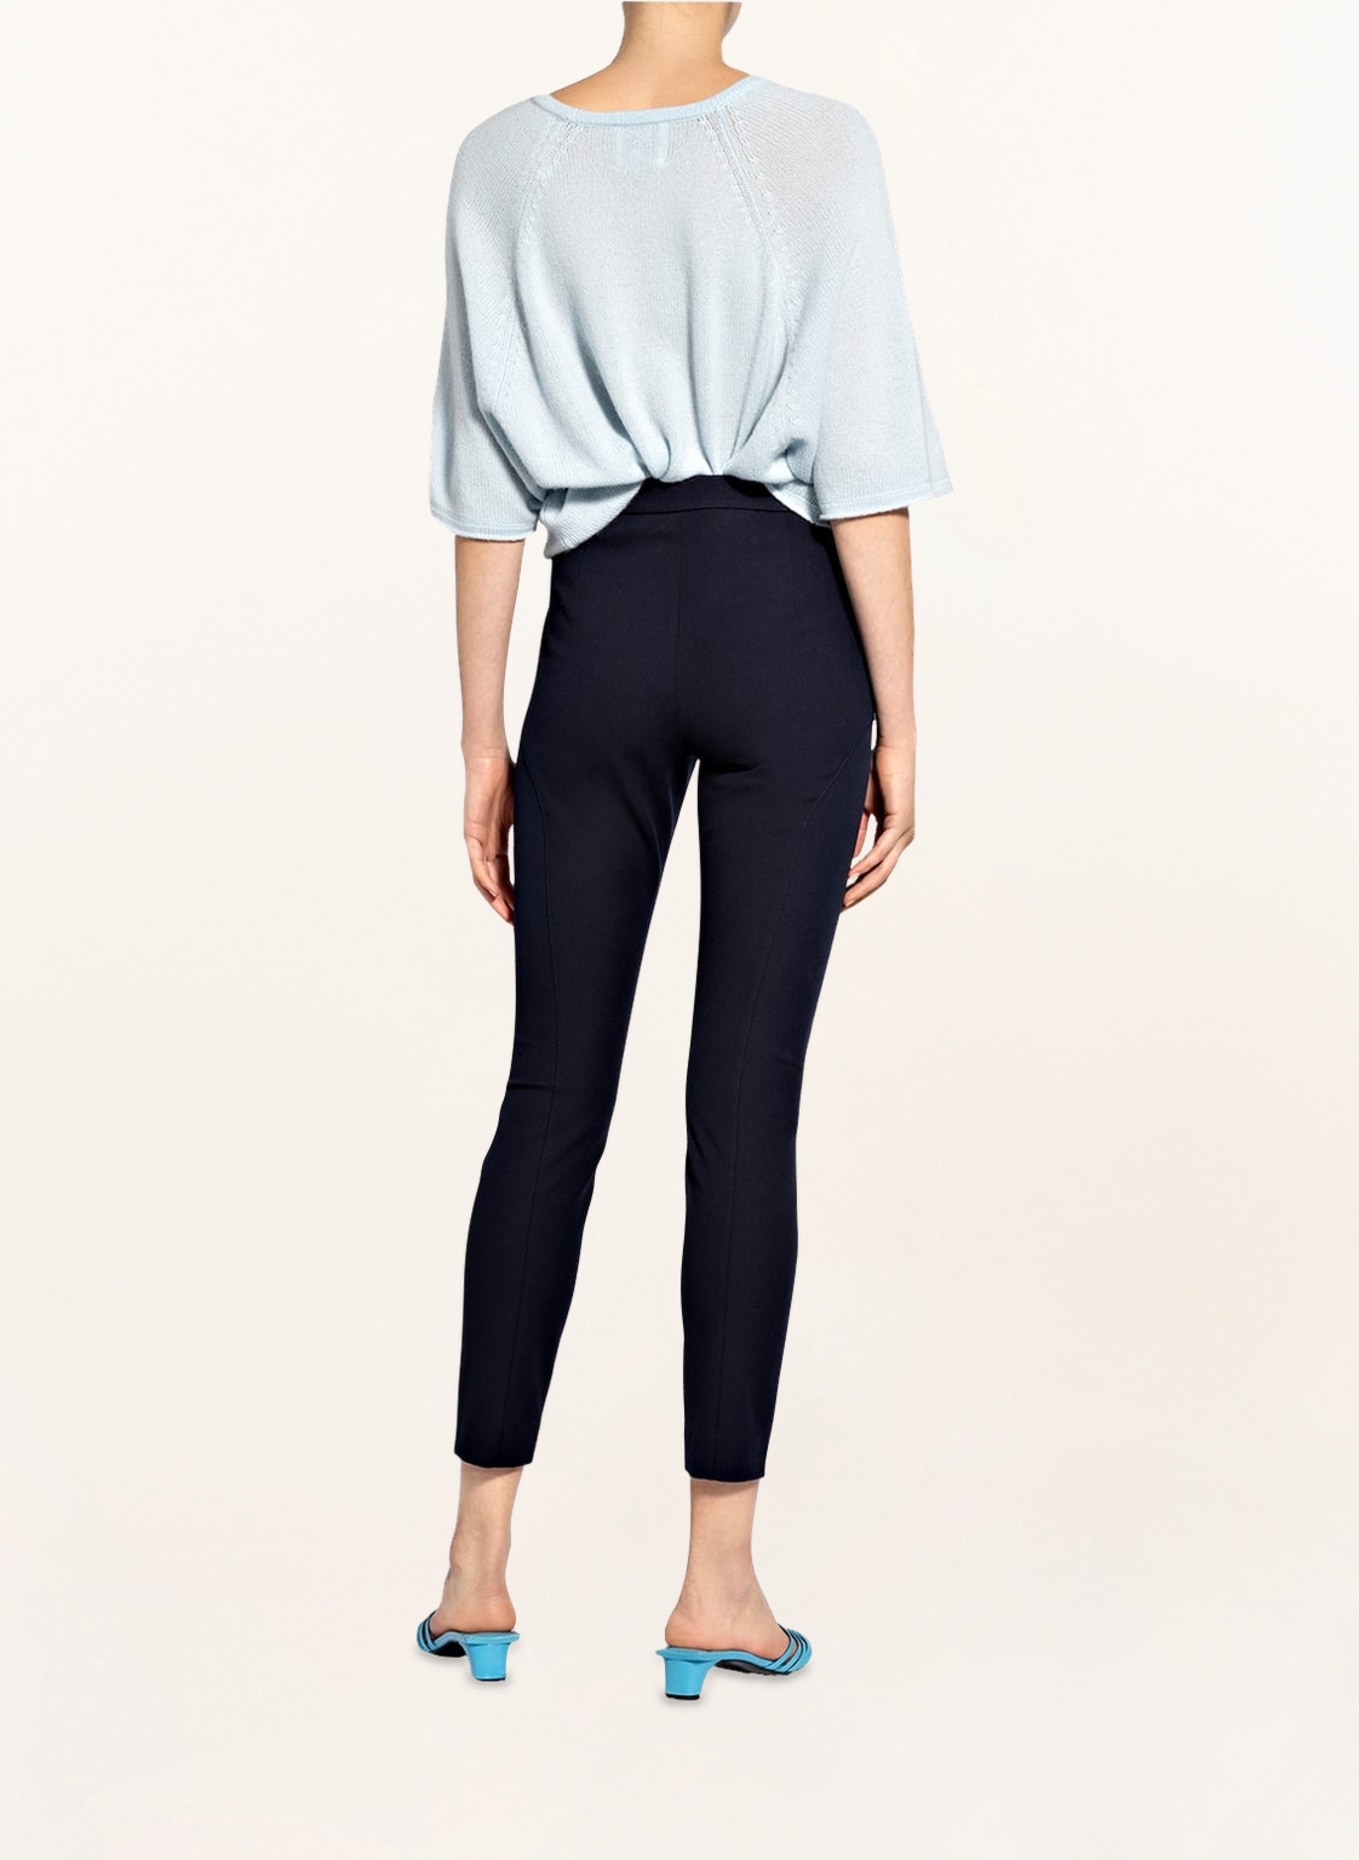 TED BAKER Trousers CALYA, Color: DARK BLUE (Image 3)